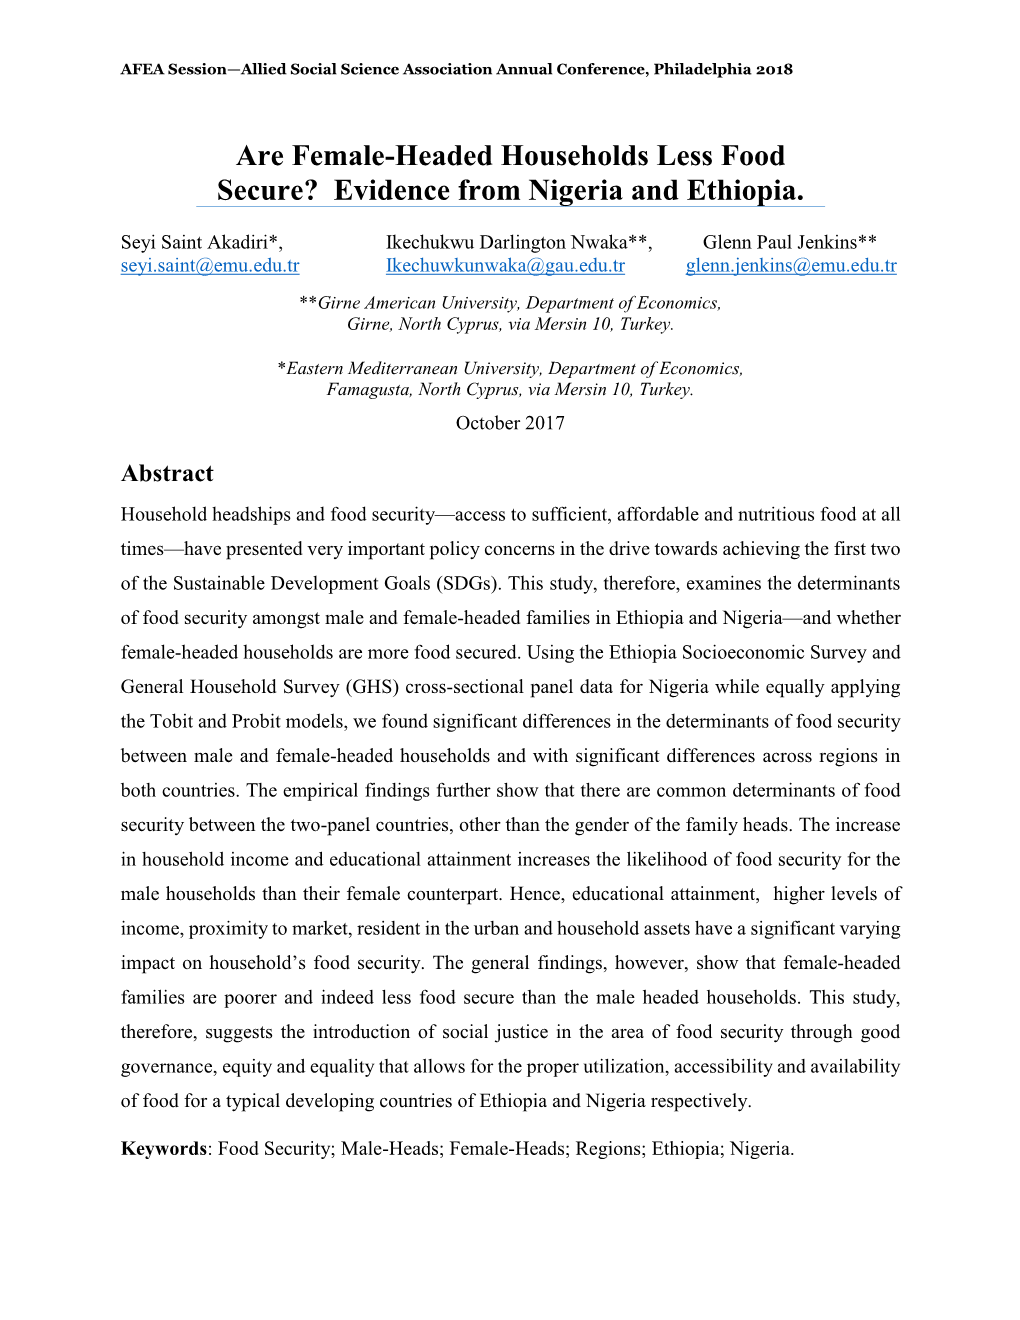 Are Female-Headed Households Less Food Secure? Evidence from Nigeria and Ethiopia